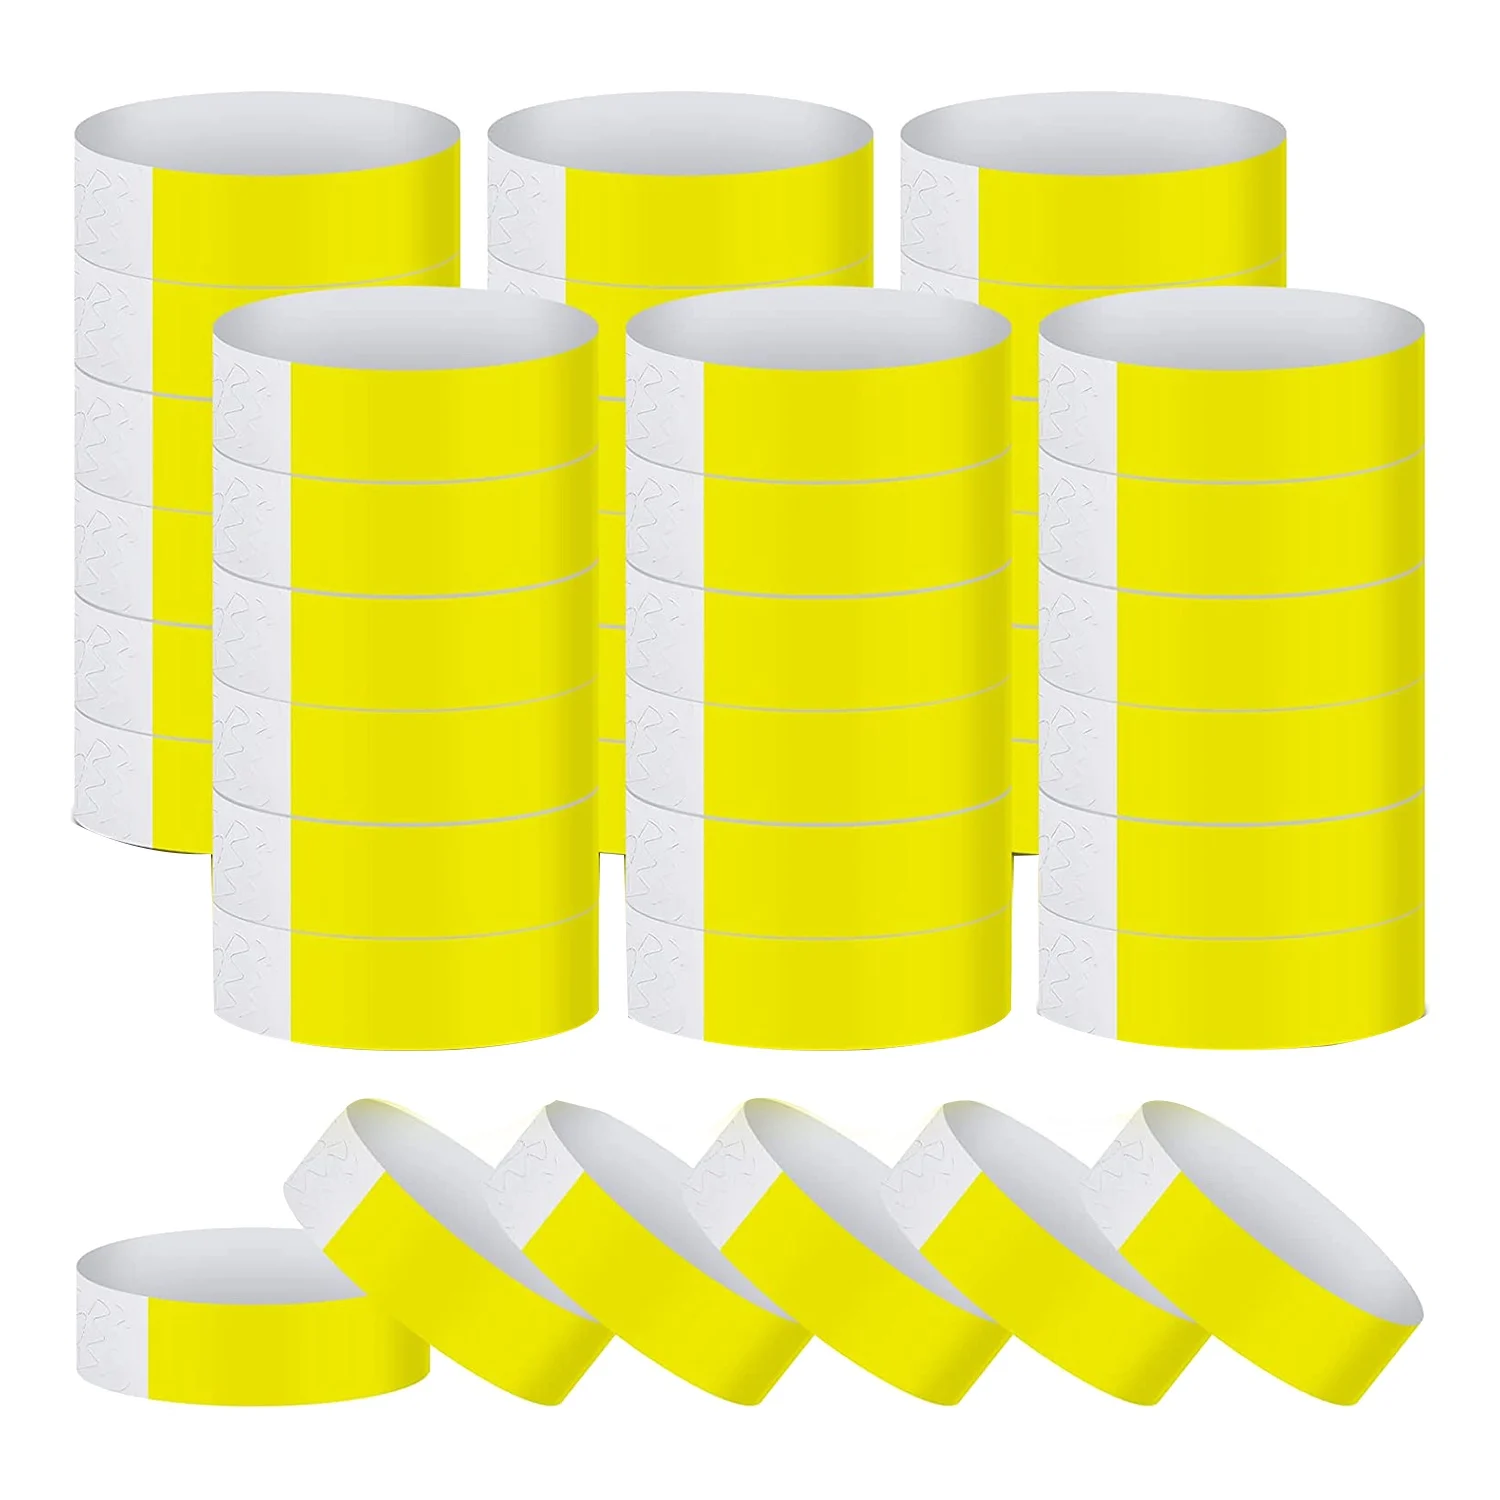 

600 Packs of Paper Wristbands Neon Event Wristbands Colorful Wristbands Waterproof Paper